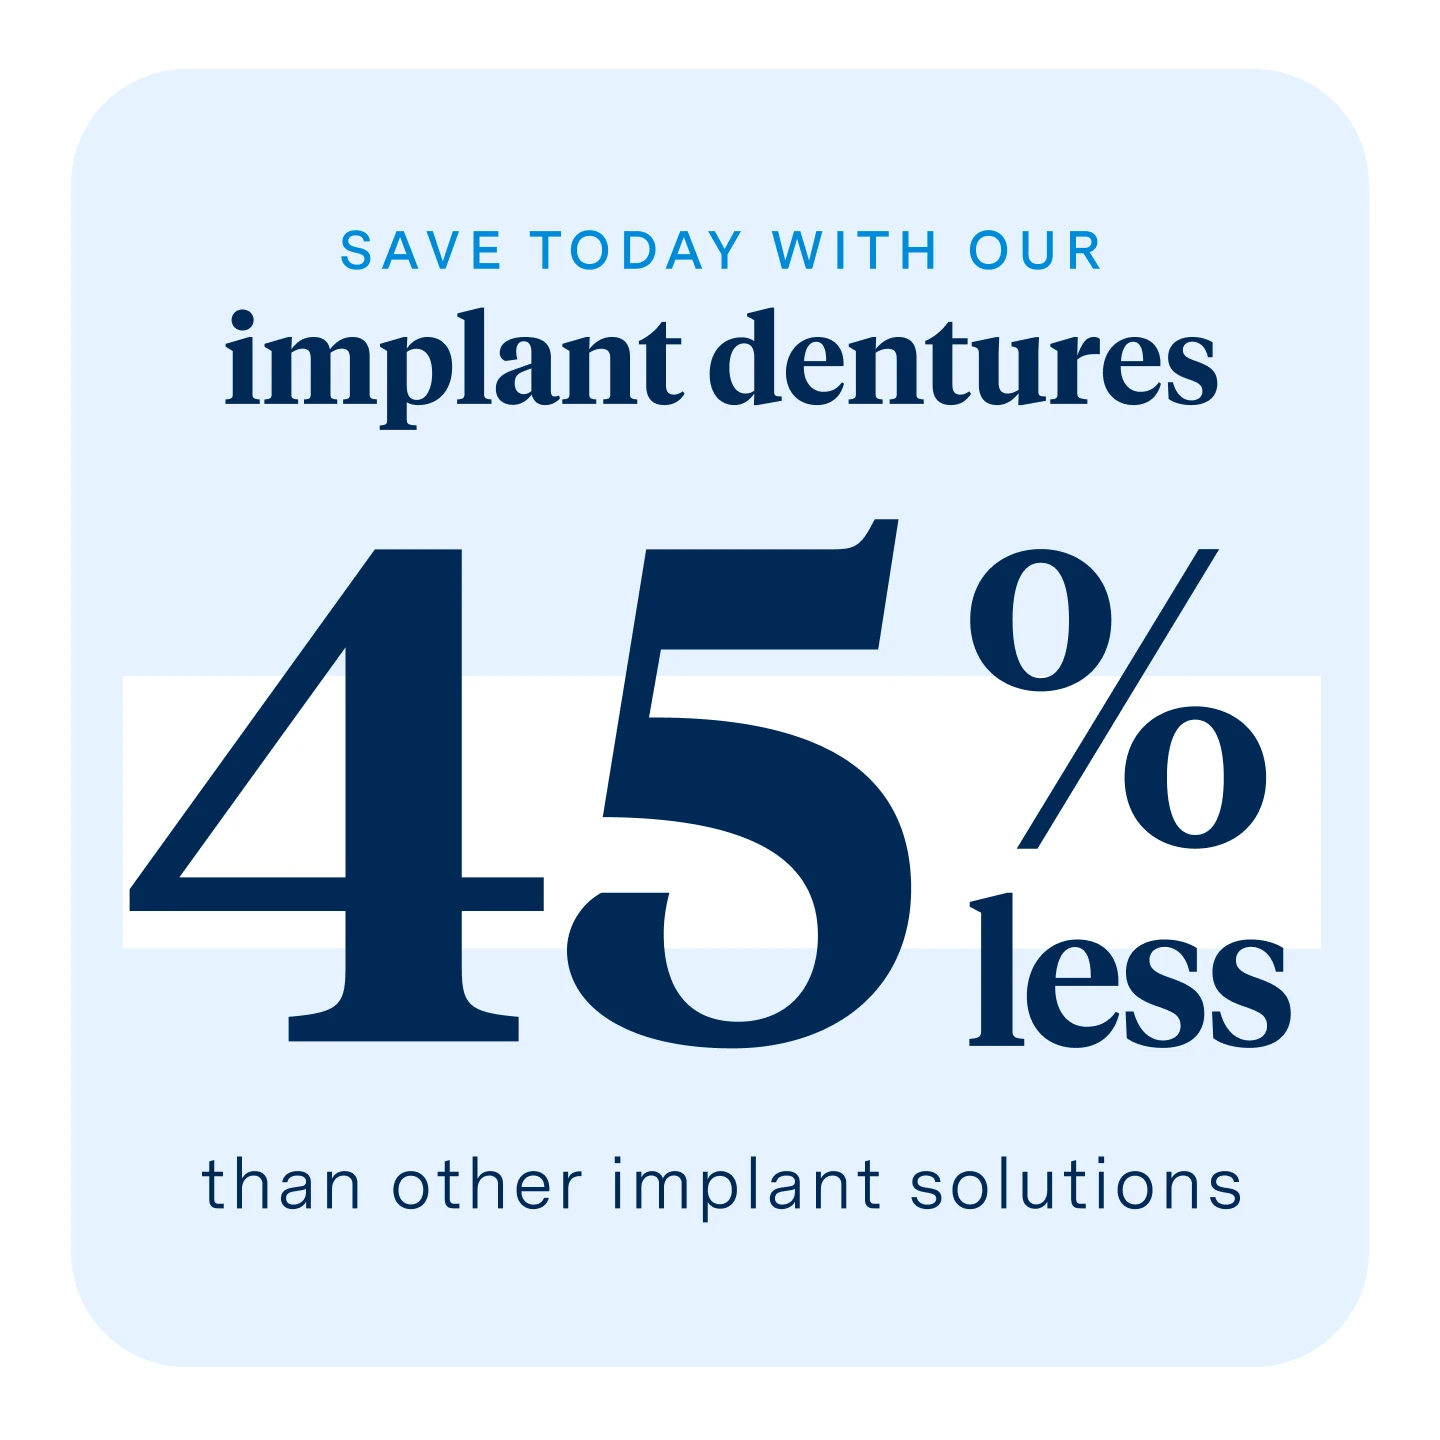 Save today with our implant dentures. 45% less than other implant solutions